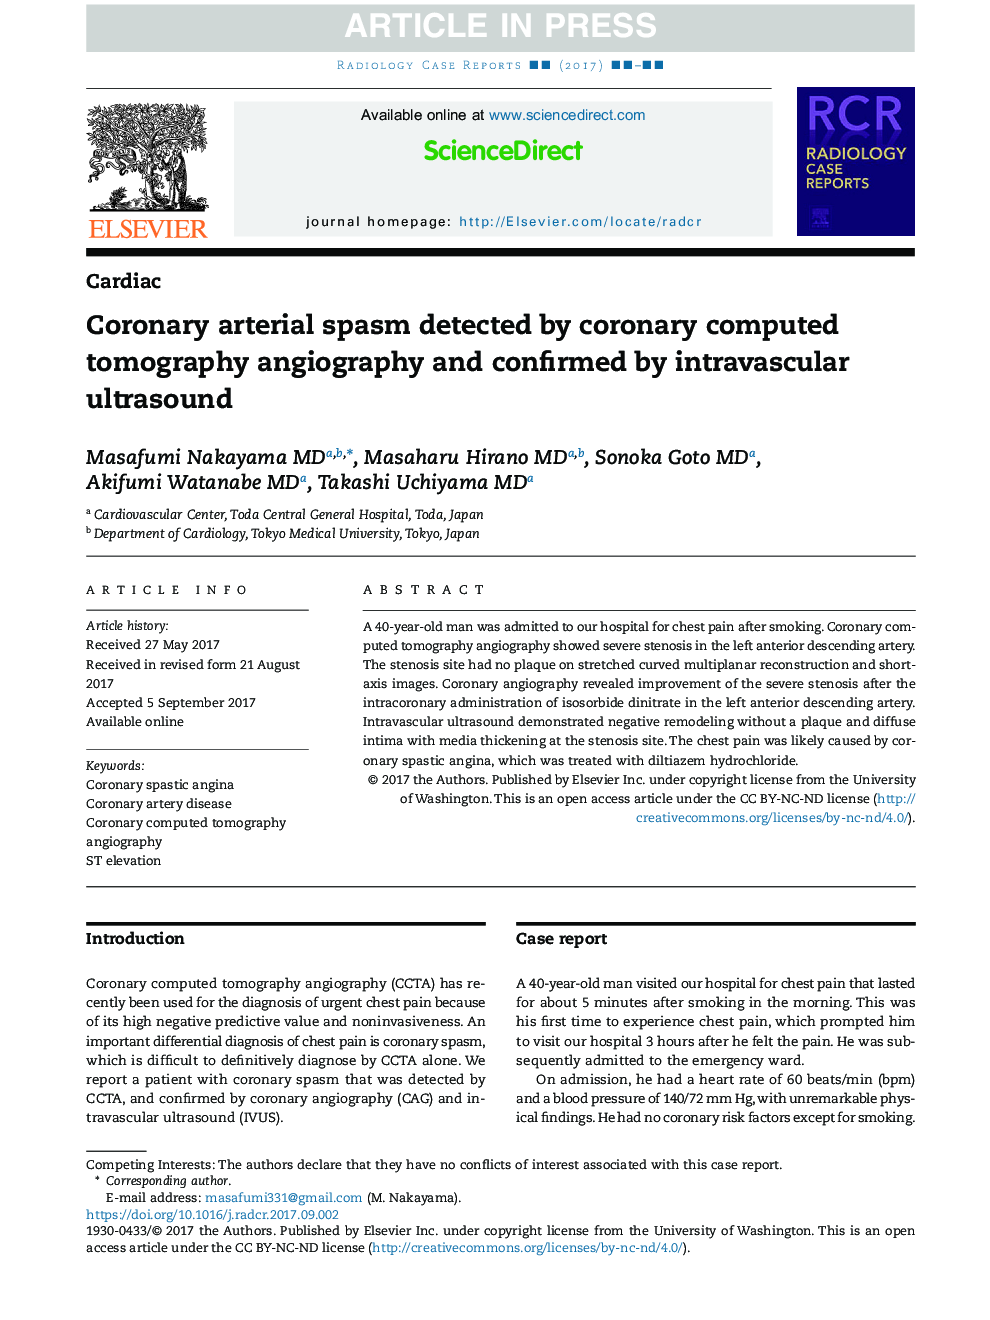 Coronary arterial spasm detected by coronary computed tomography angiography and confirmed by intravascular ultrasound